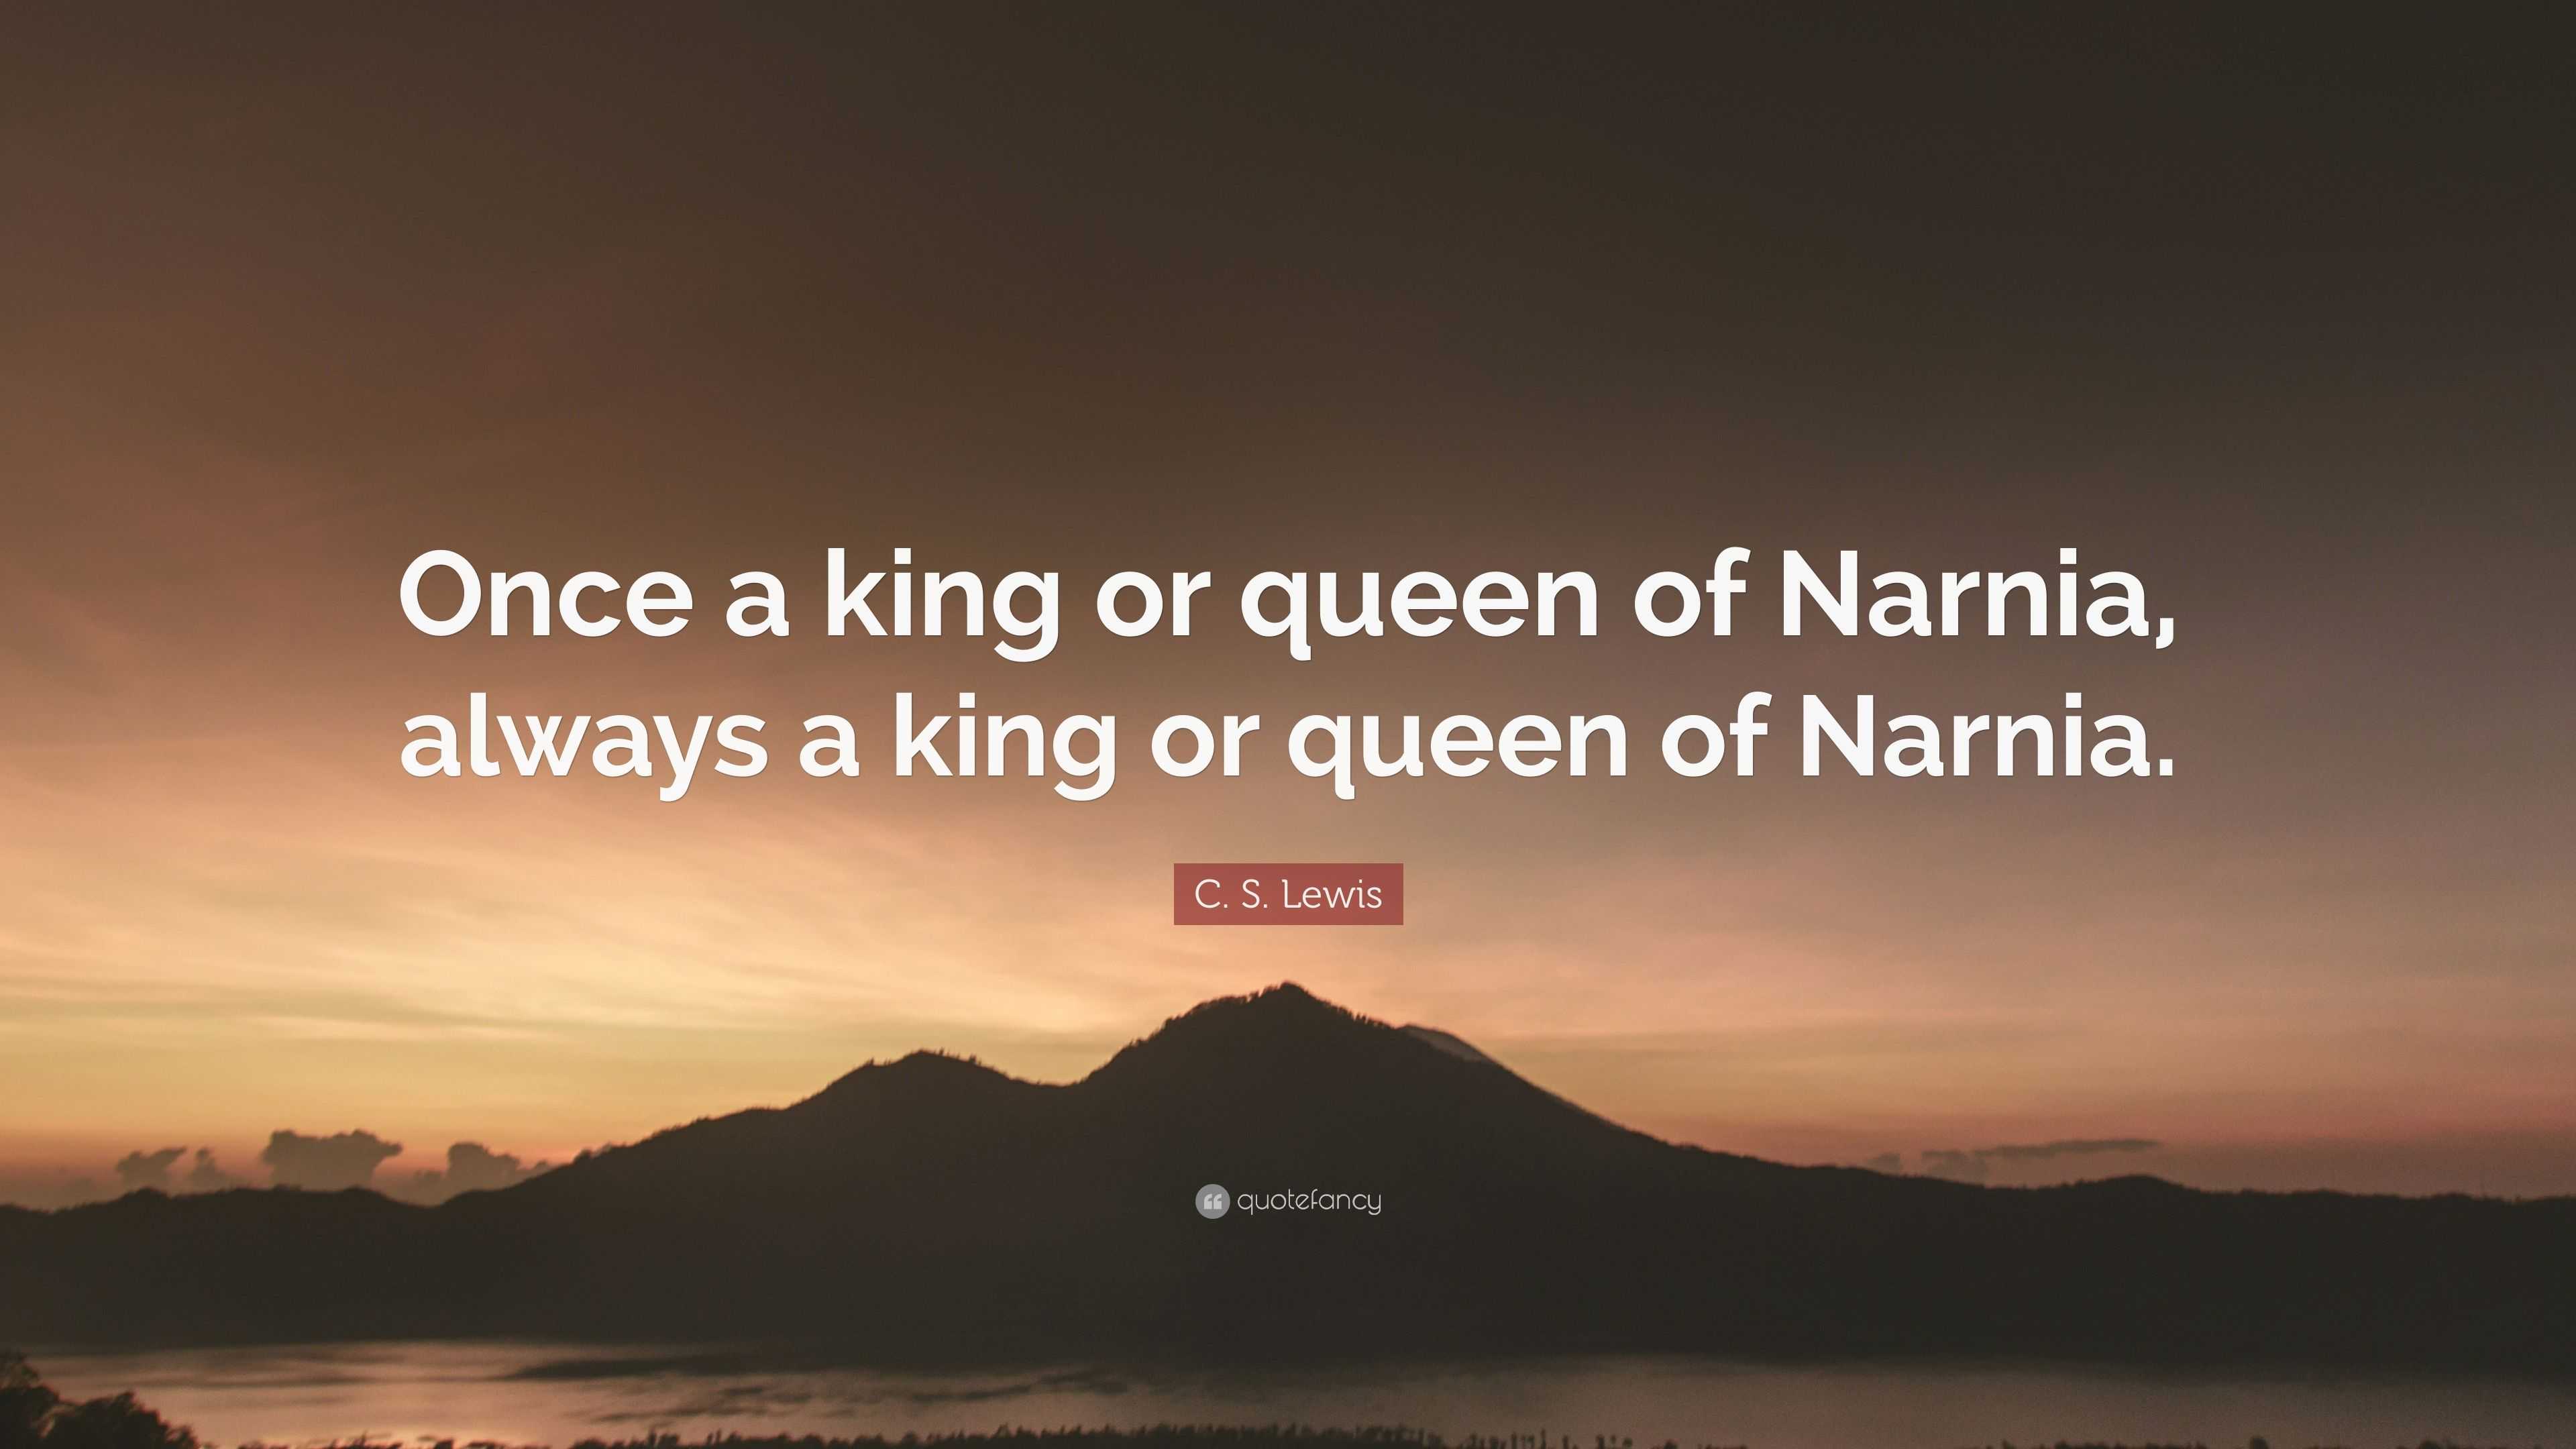 C. S. Lewis Quote: “Once a king or queen of Narnia, always a king or ...